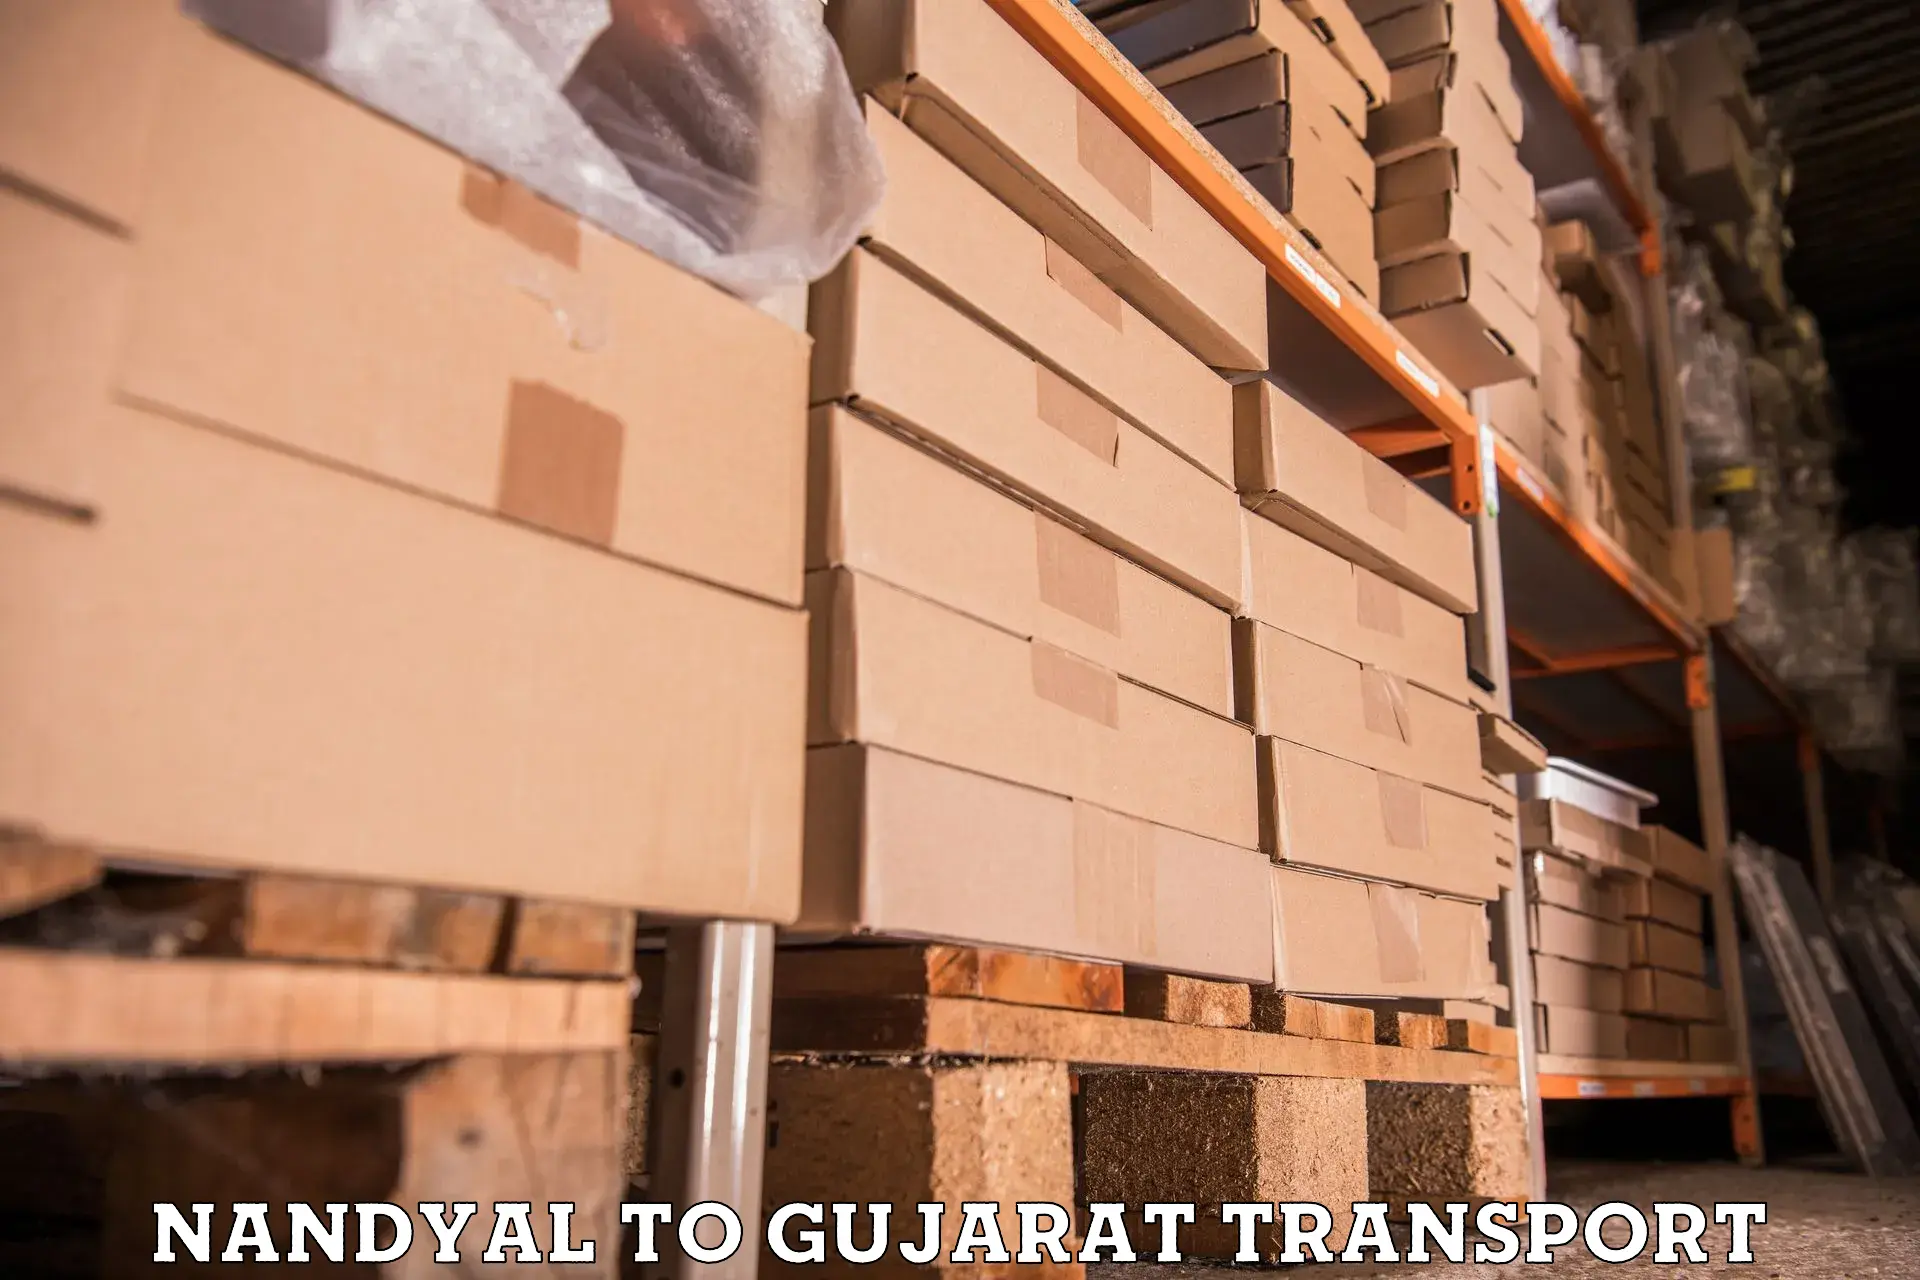 Goods delivery service Nandyal to Wankaner